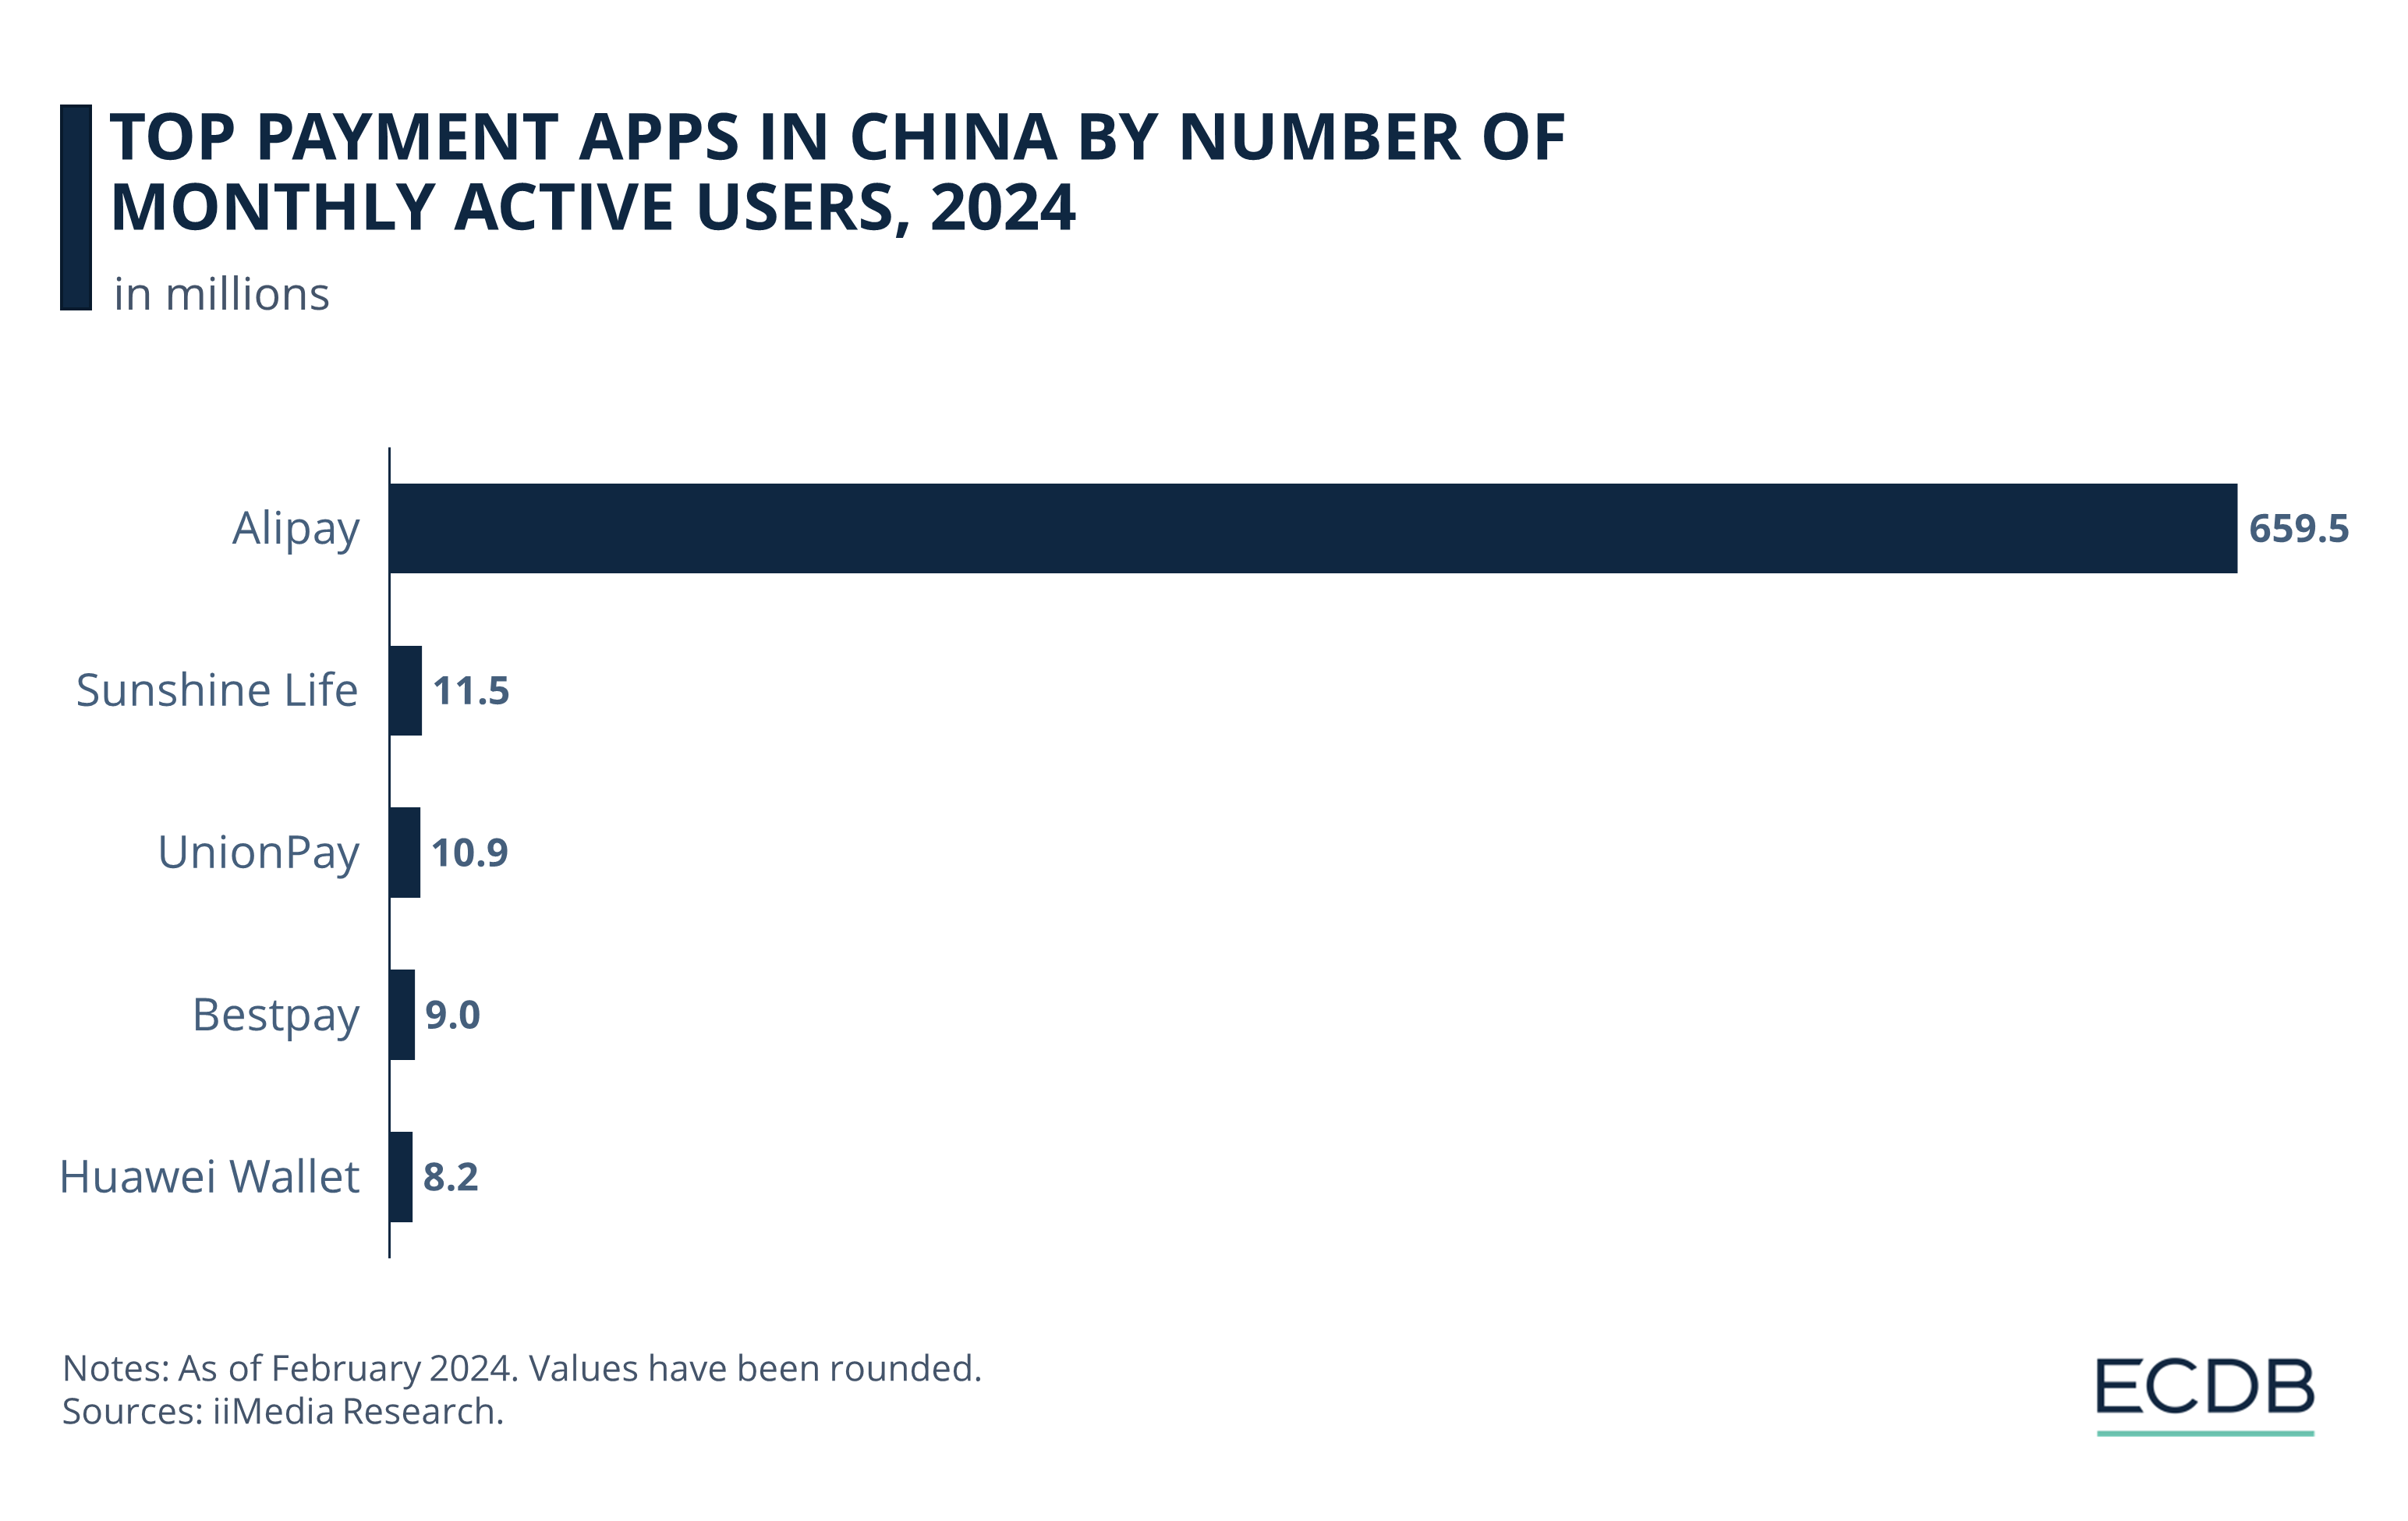 Top Payment Apps in China by Number of Monthly Active Users, 2024